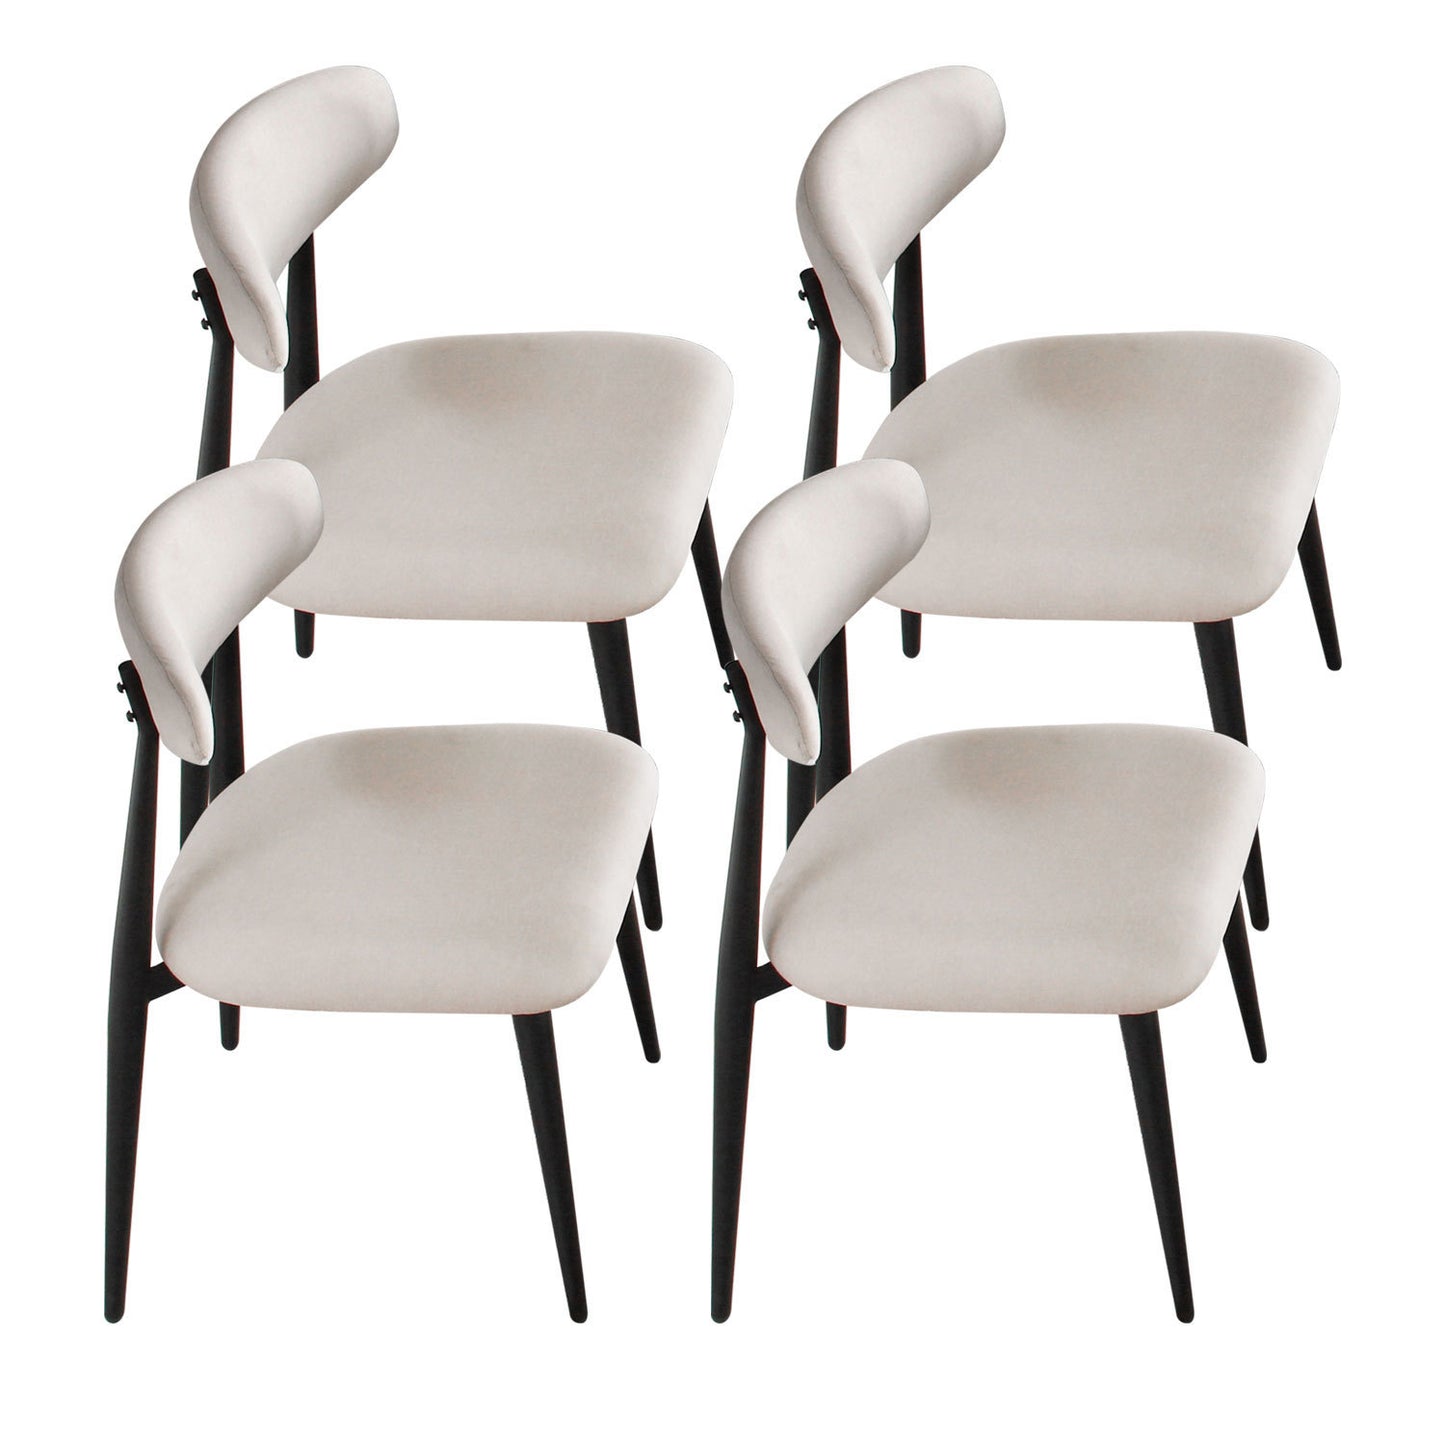 Dining Chairs set of 4, Upholstered Chairs with Black Metal Frame (Light Grey)